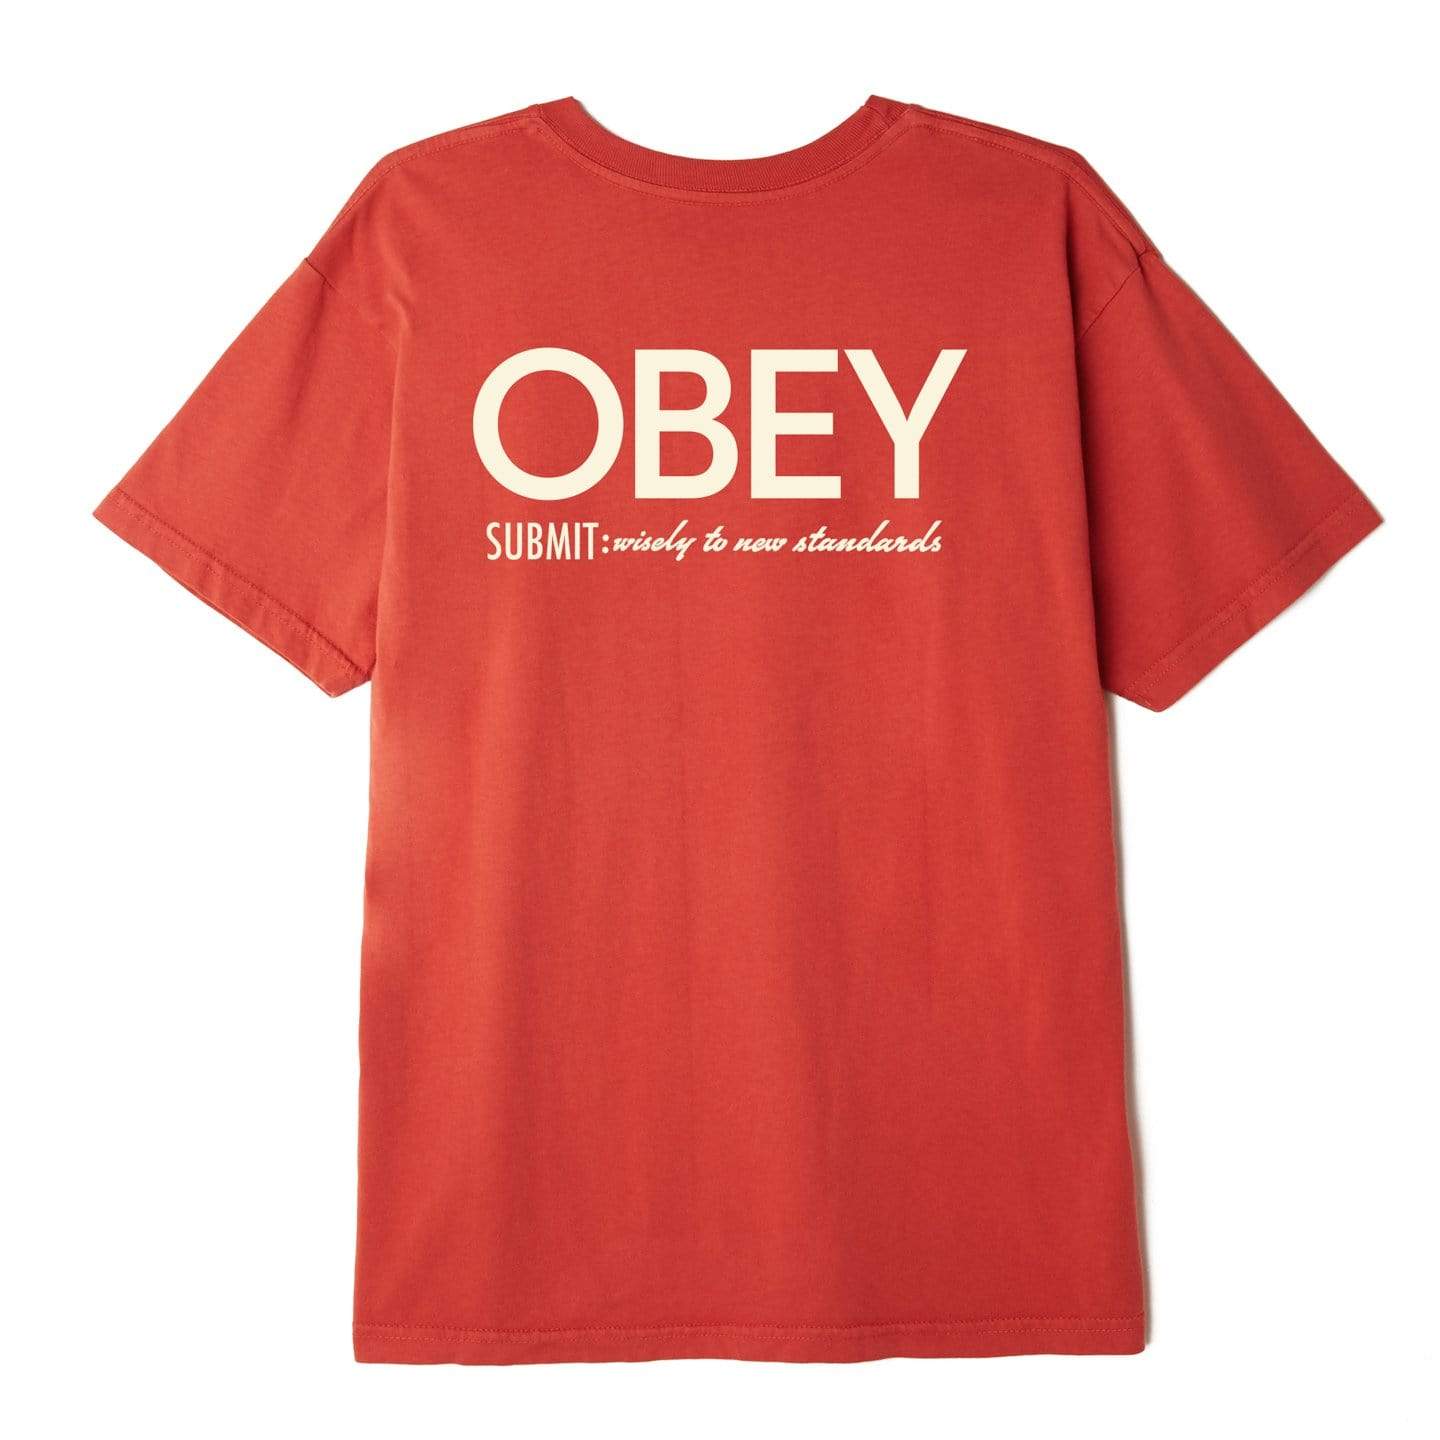  Chili Pepper Obey, Men's Submit Wisely Tee (Orange)